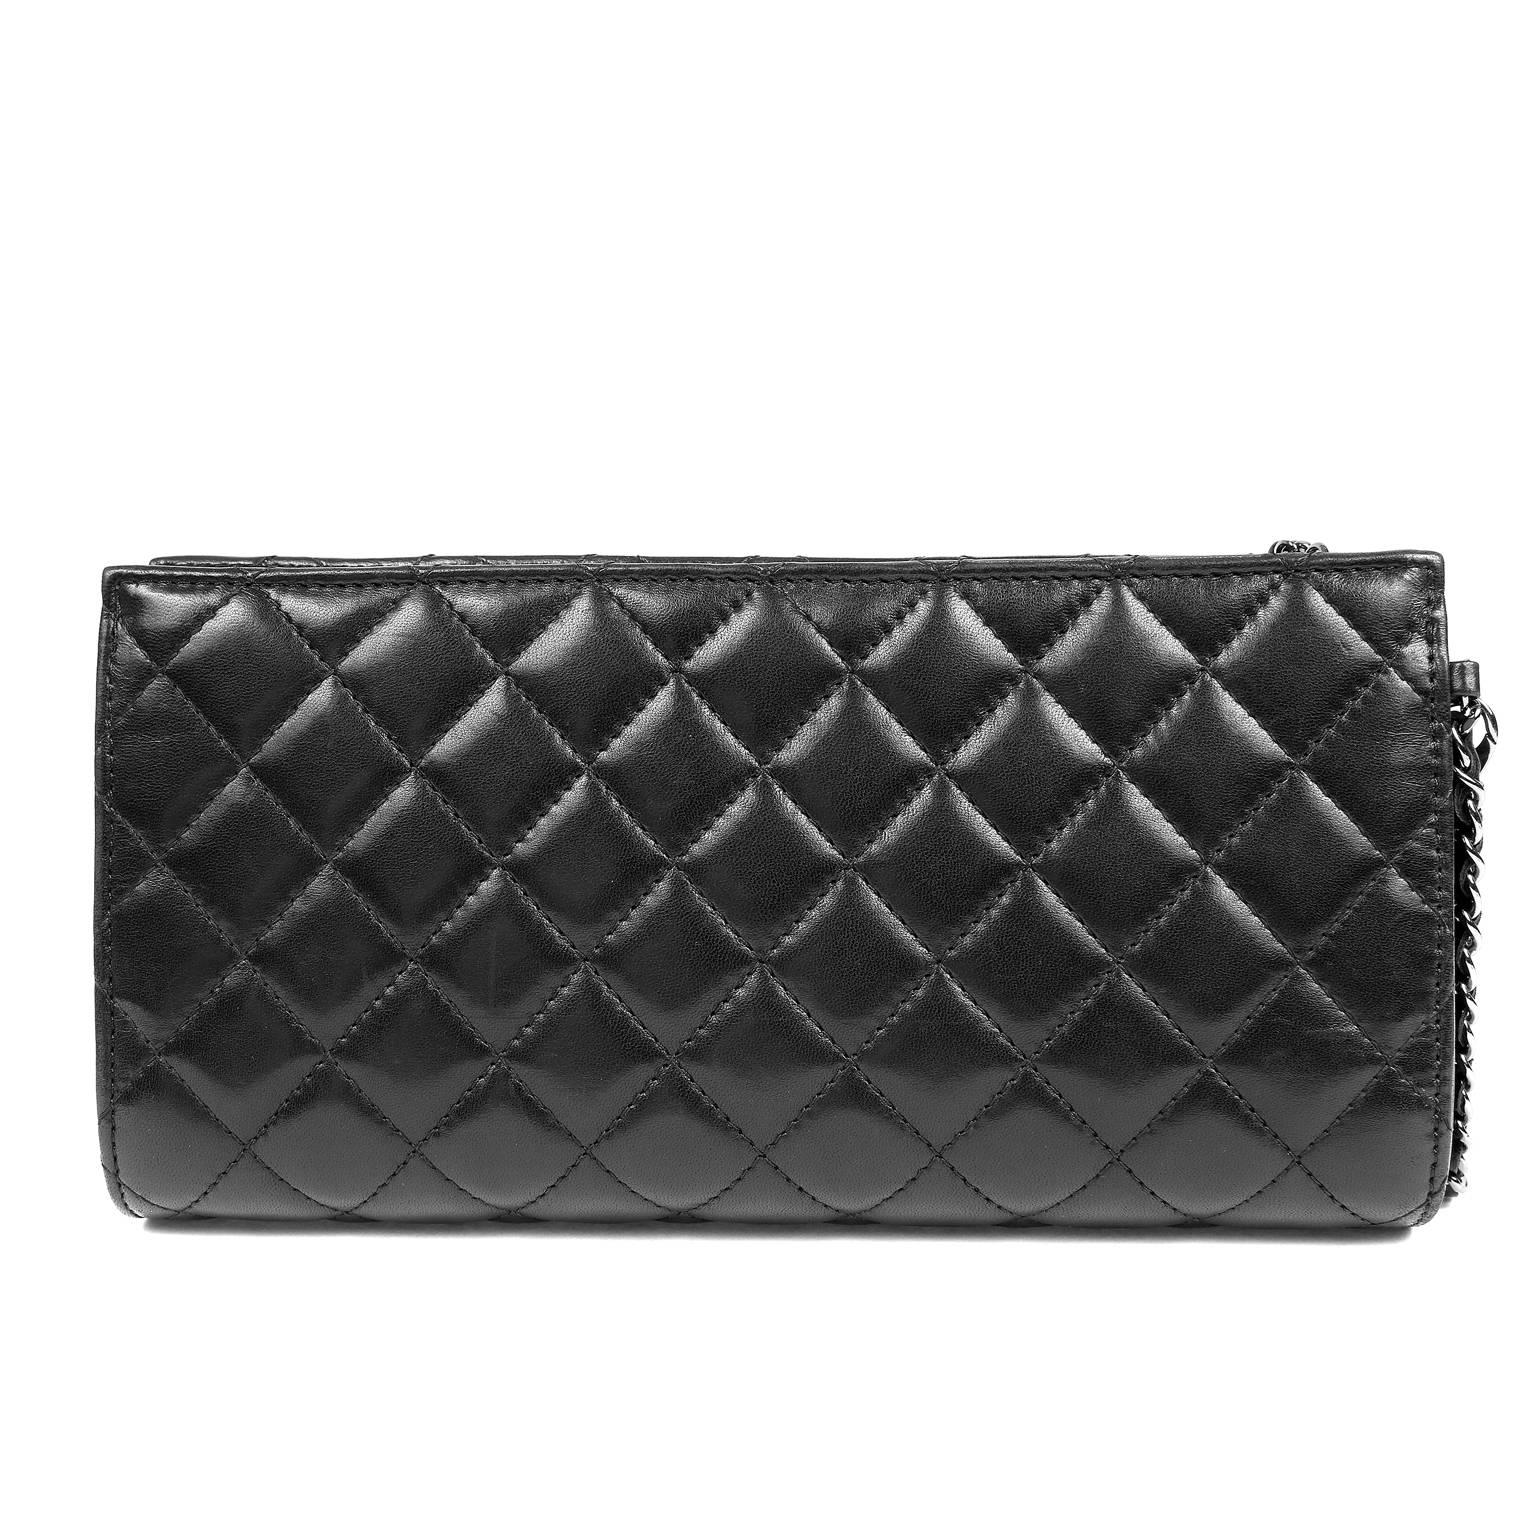 Chanel Black Lambskin Wristlet- PRISTINE
 Carried as a clutch or tossed inside a larger tote, this piece is both chic and versatile. 

Soft black lambskin pouch is quilted in signature Chanel diamond stitched pattern. Front snap closure pocket   and